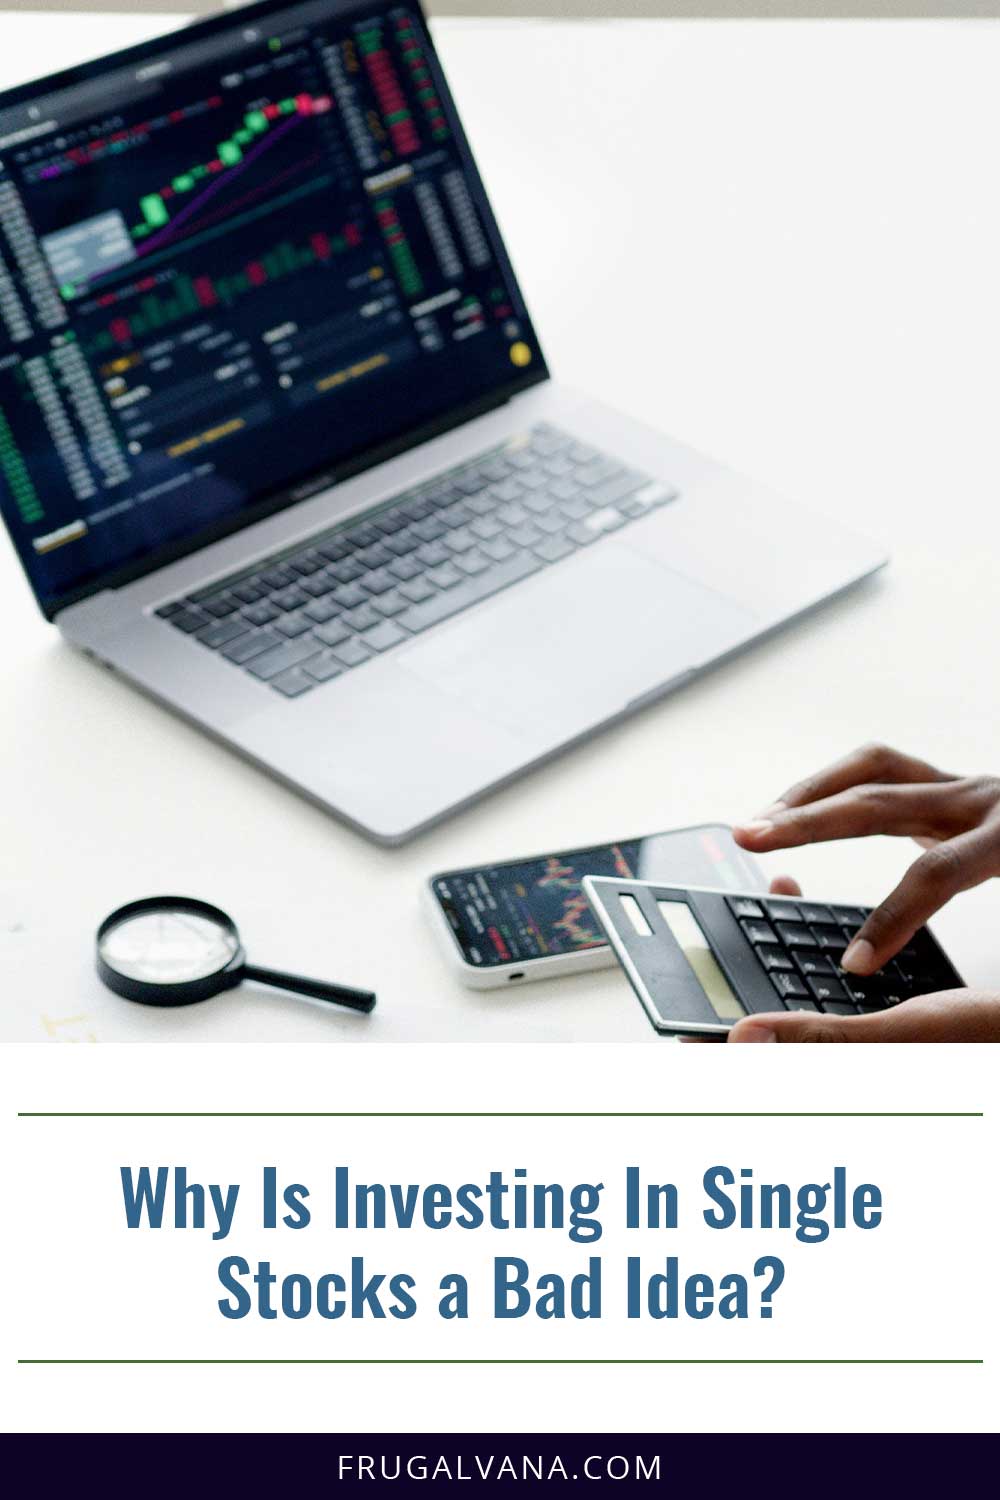 Why Is Investing In Single Stocks a Bad Idea?